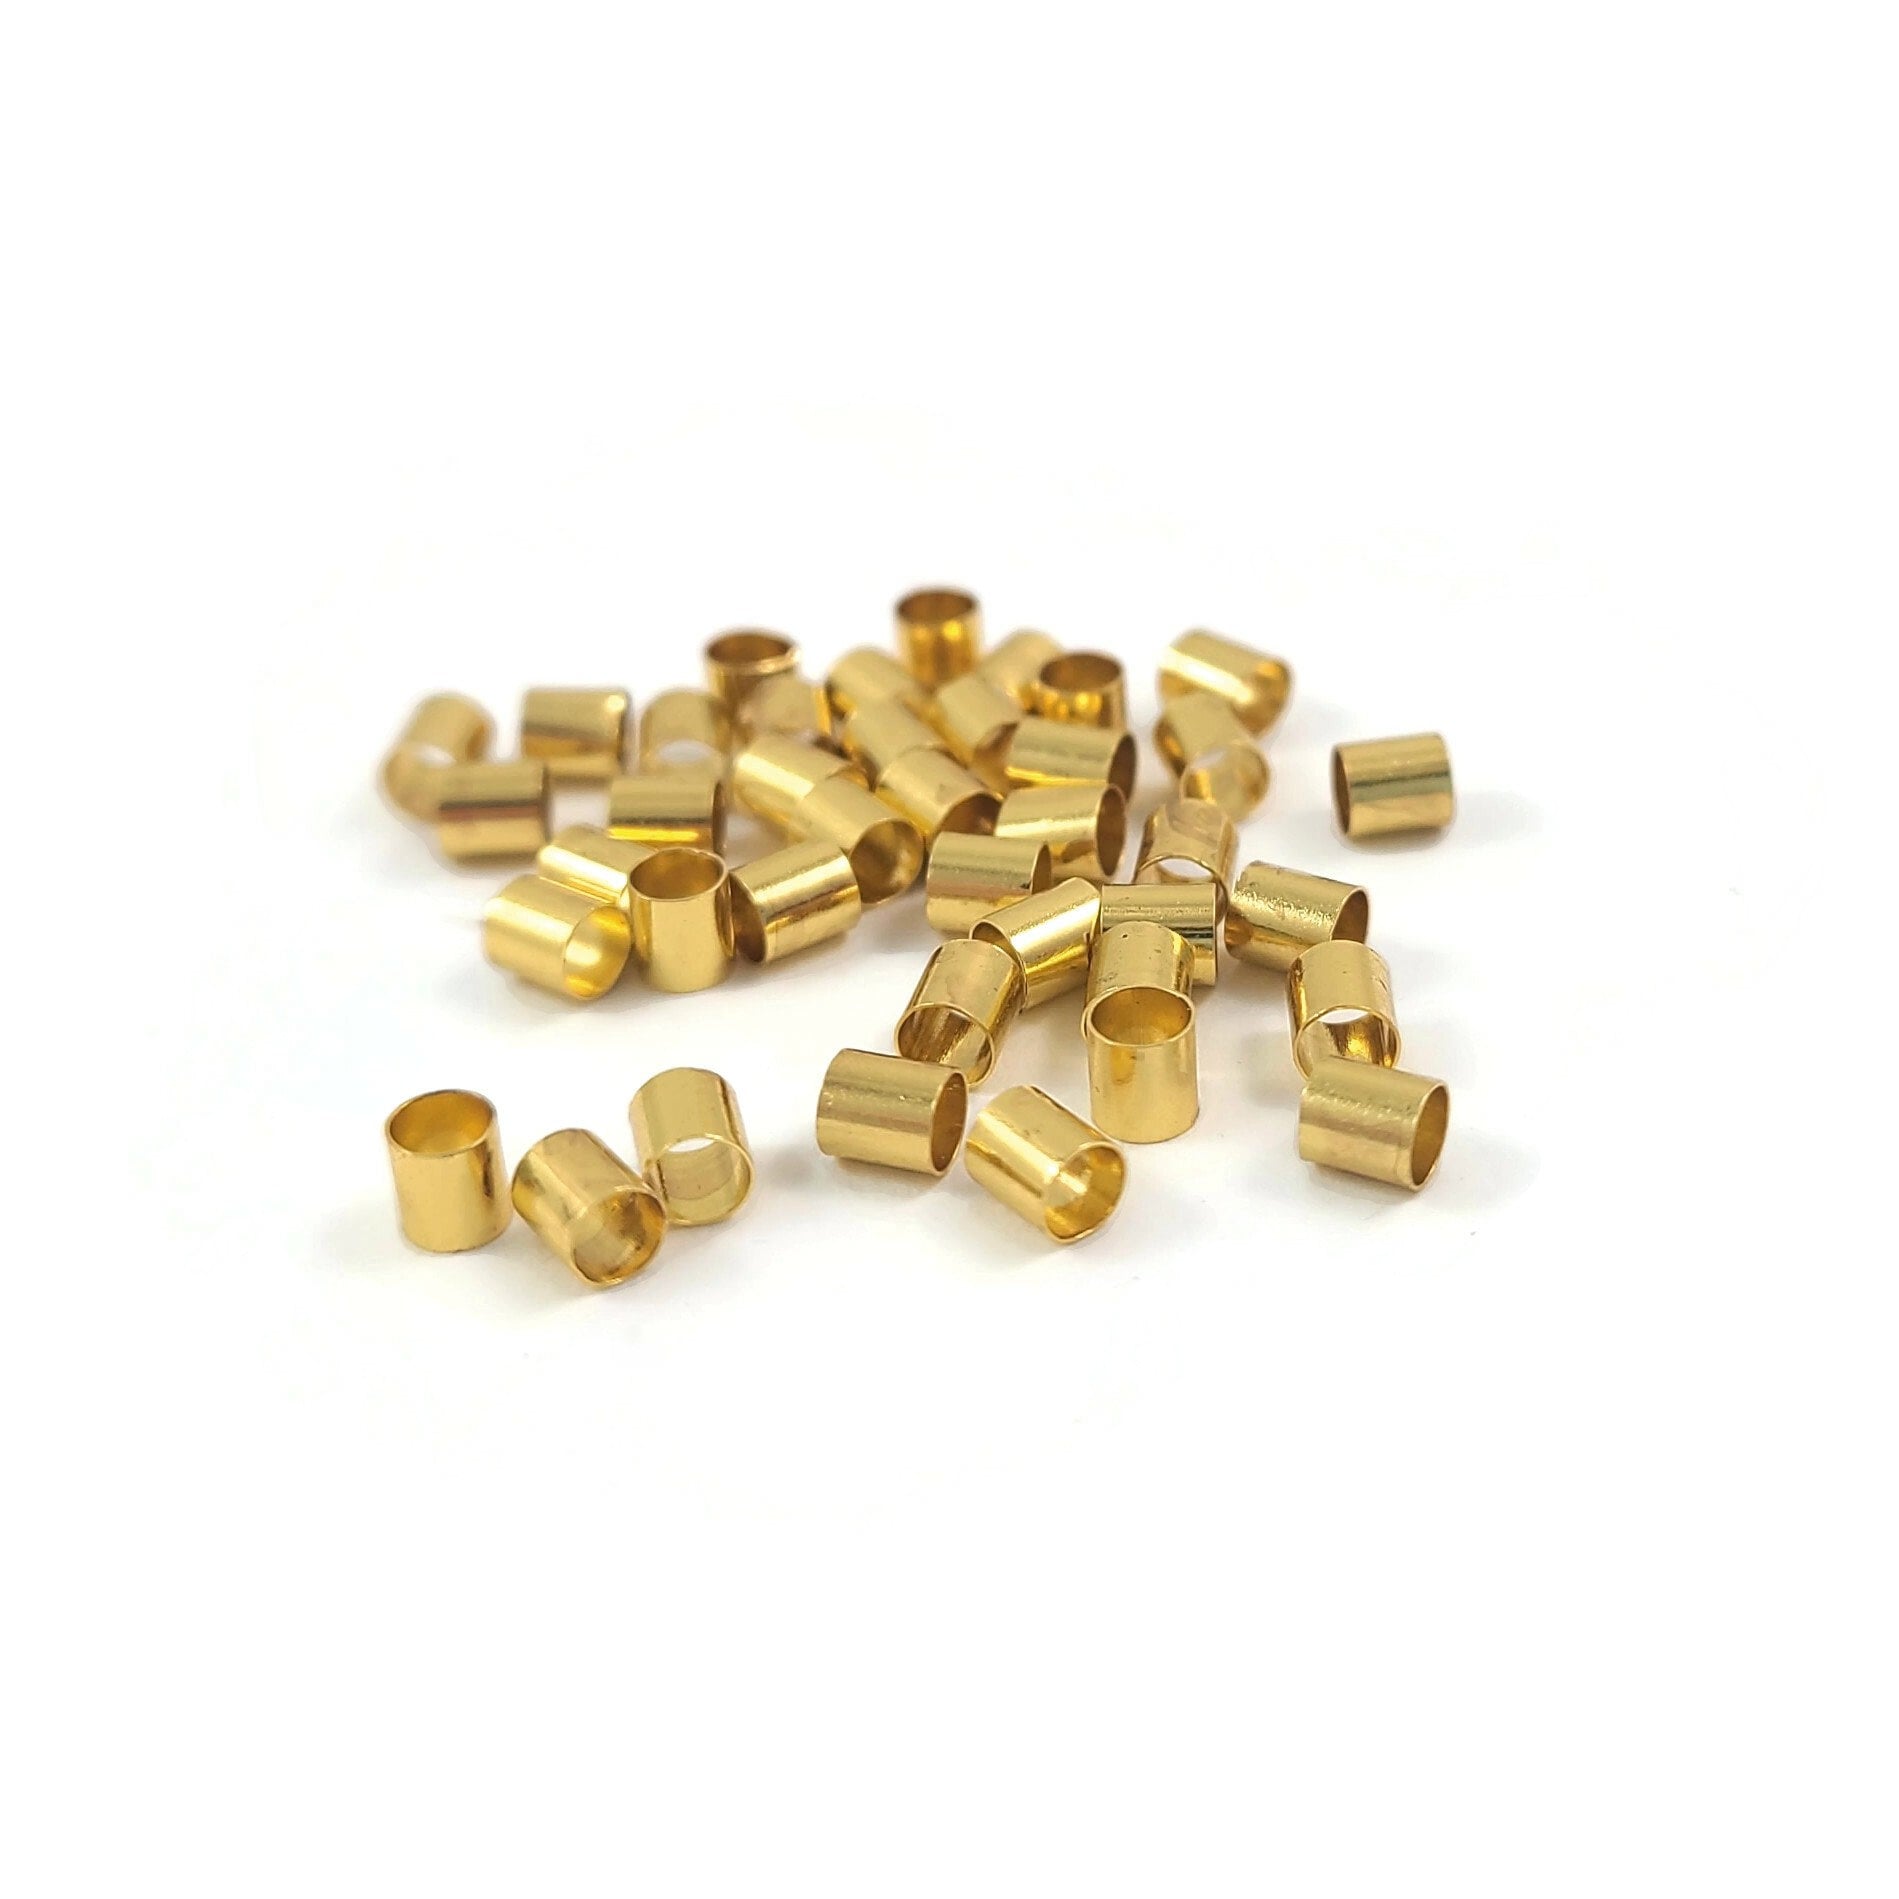 3mm crimp tube beads - Nickel, lead, and cadmium free - Hypoallergenic jewelry making findings